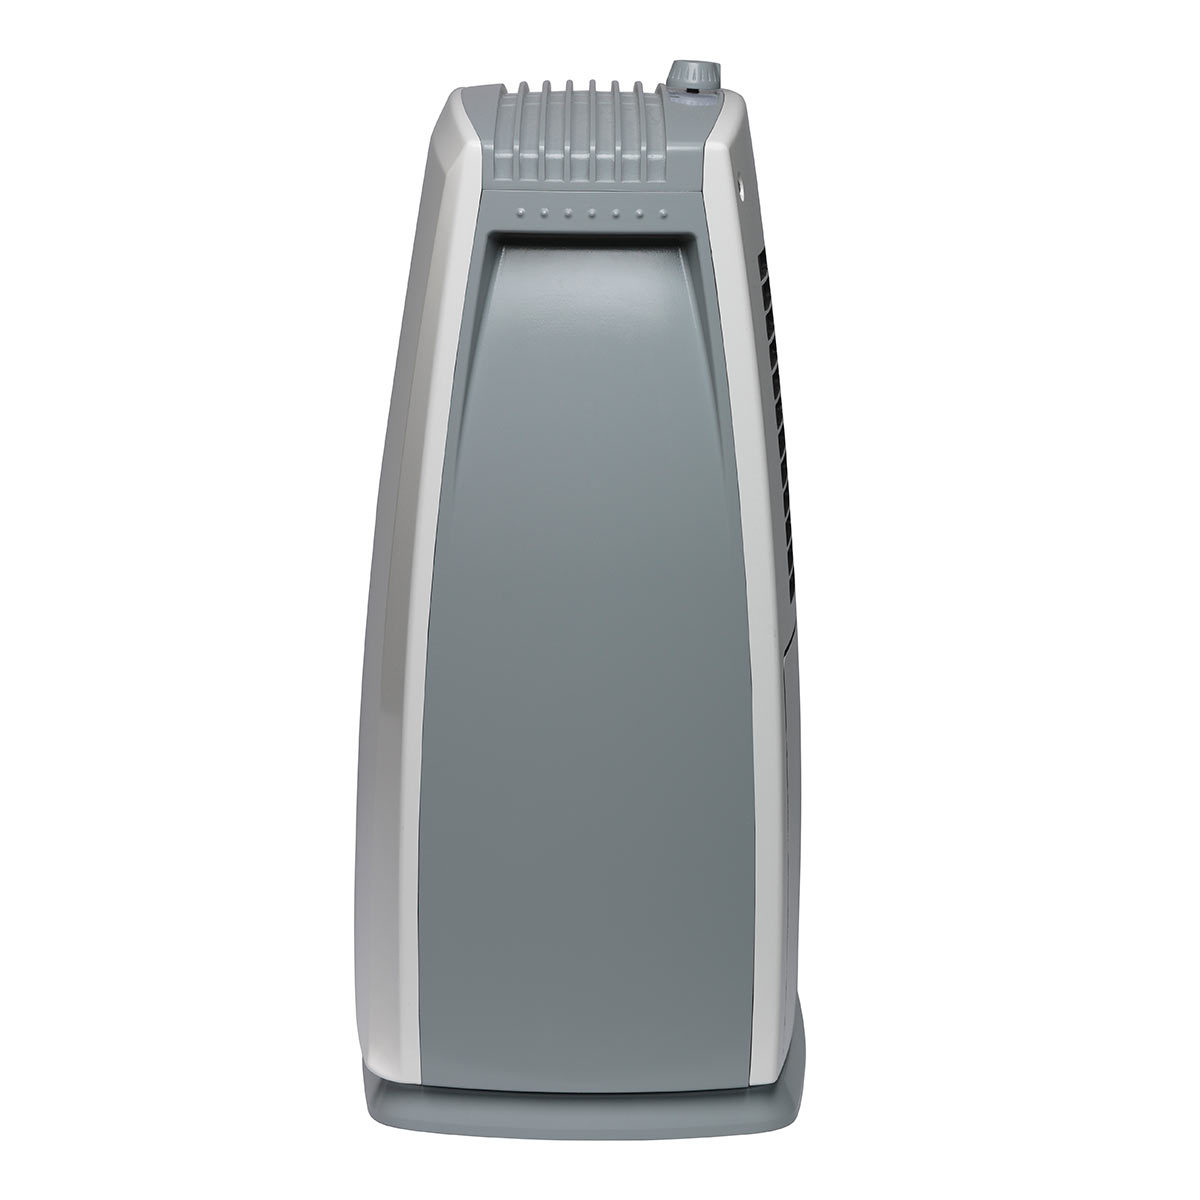 image of side of dehumidifier